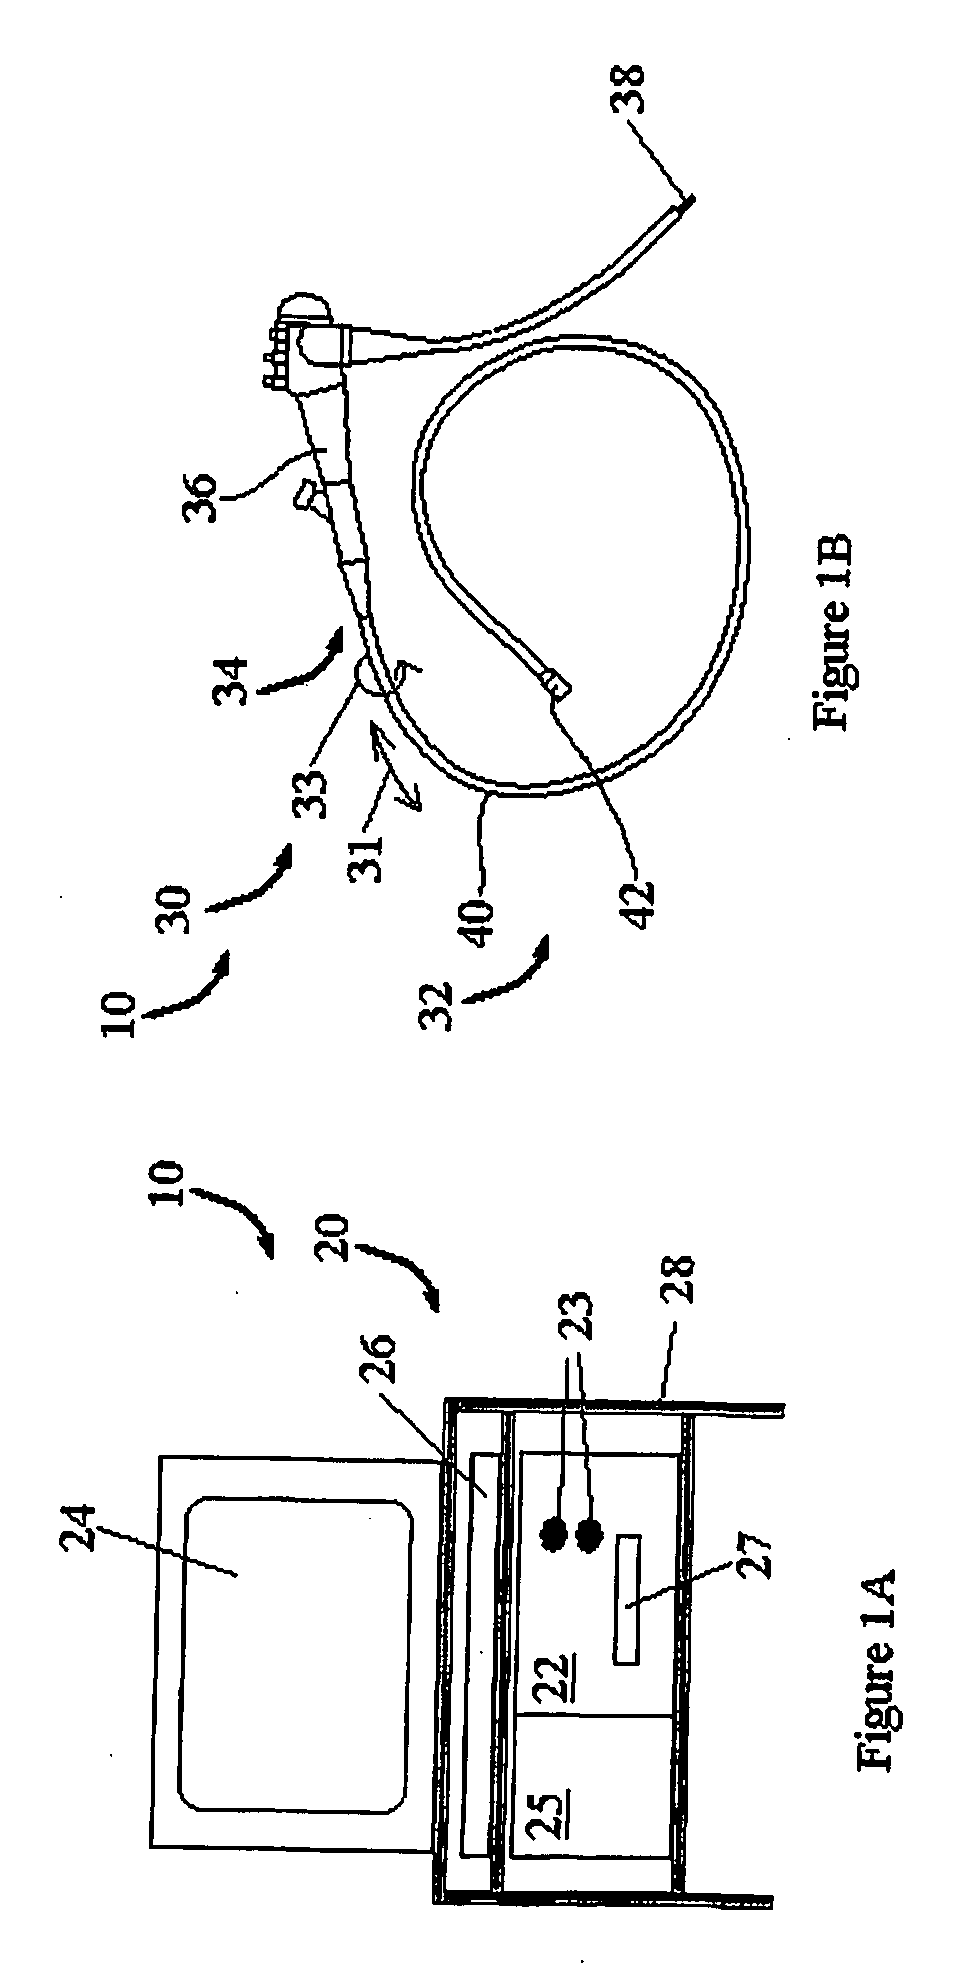 Endoscopic System for In-Vivo Procedures